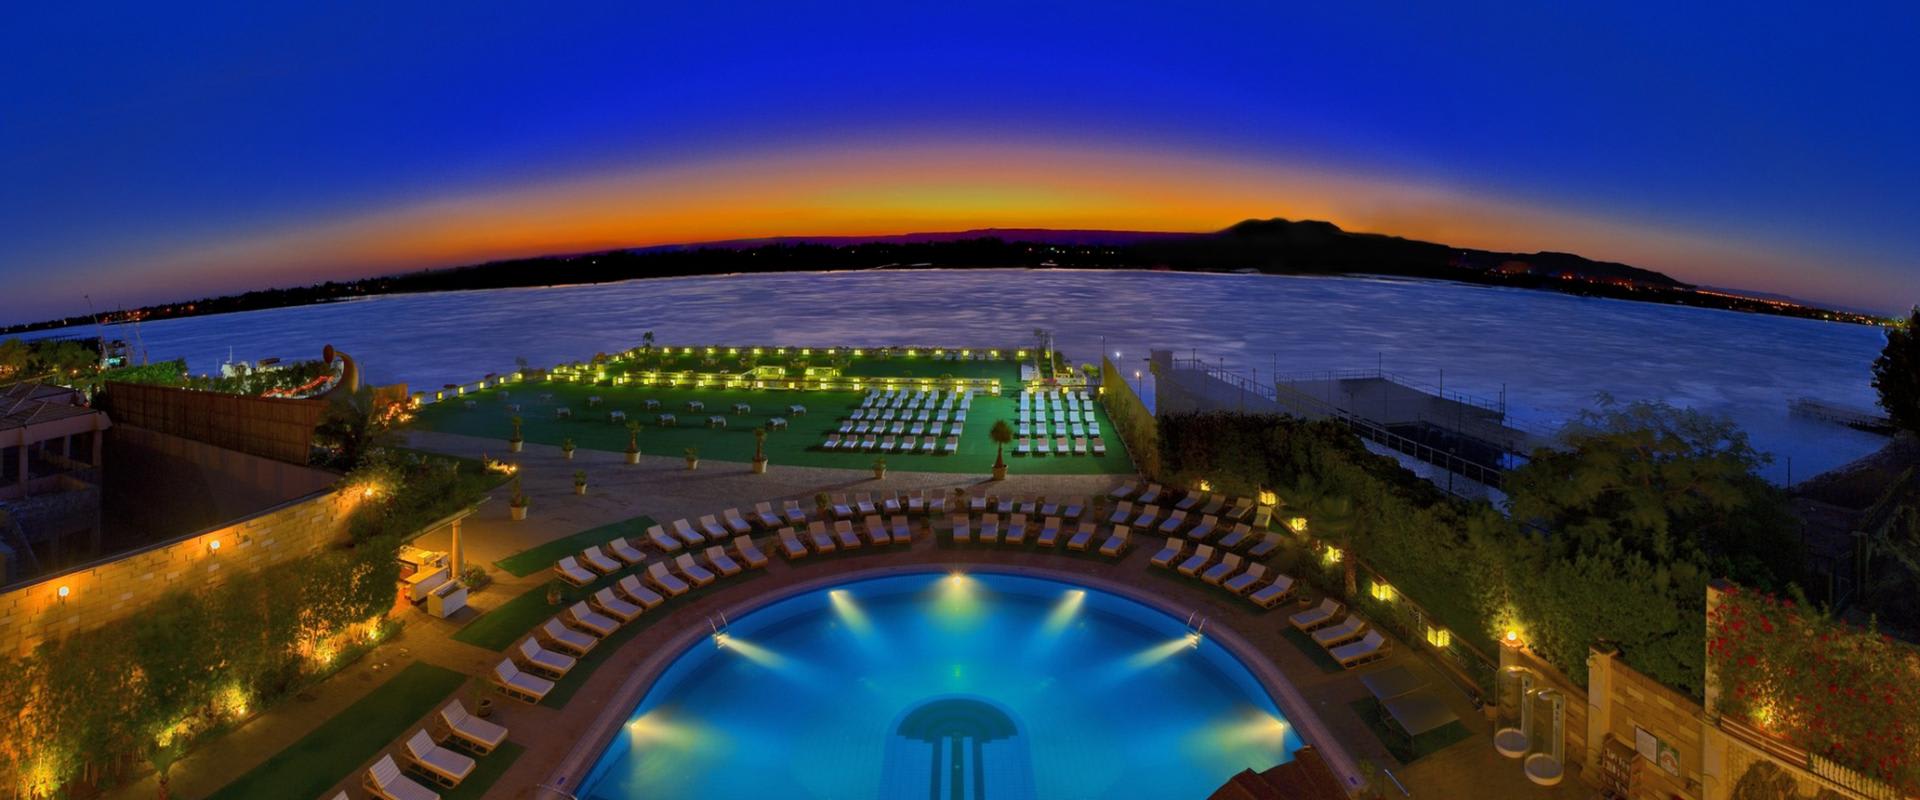 Exterior Pool at Sunset